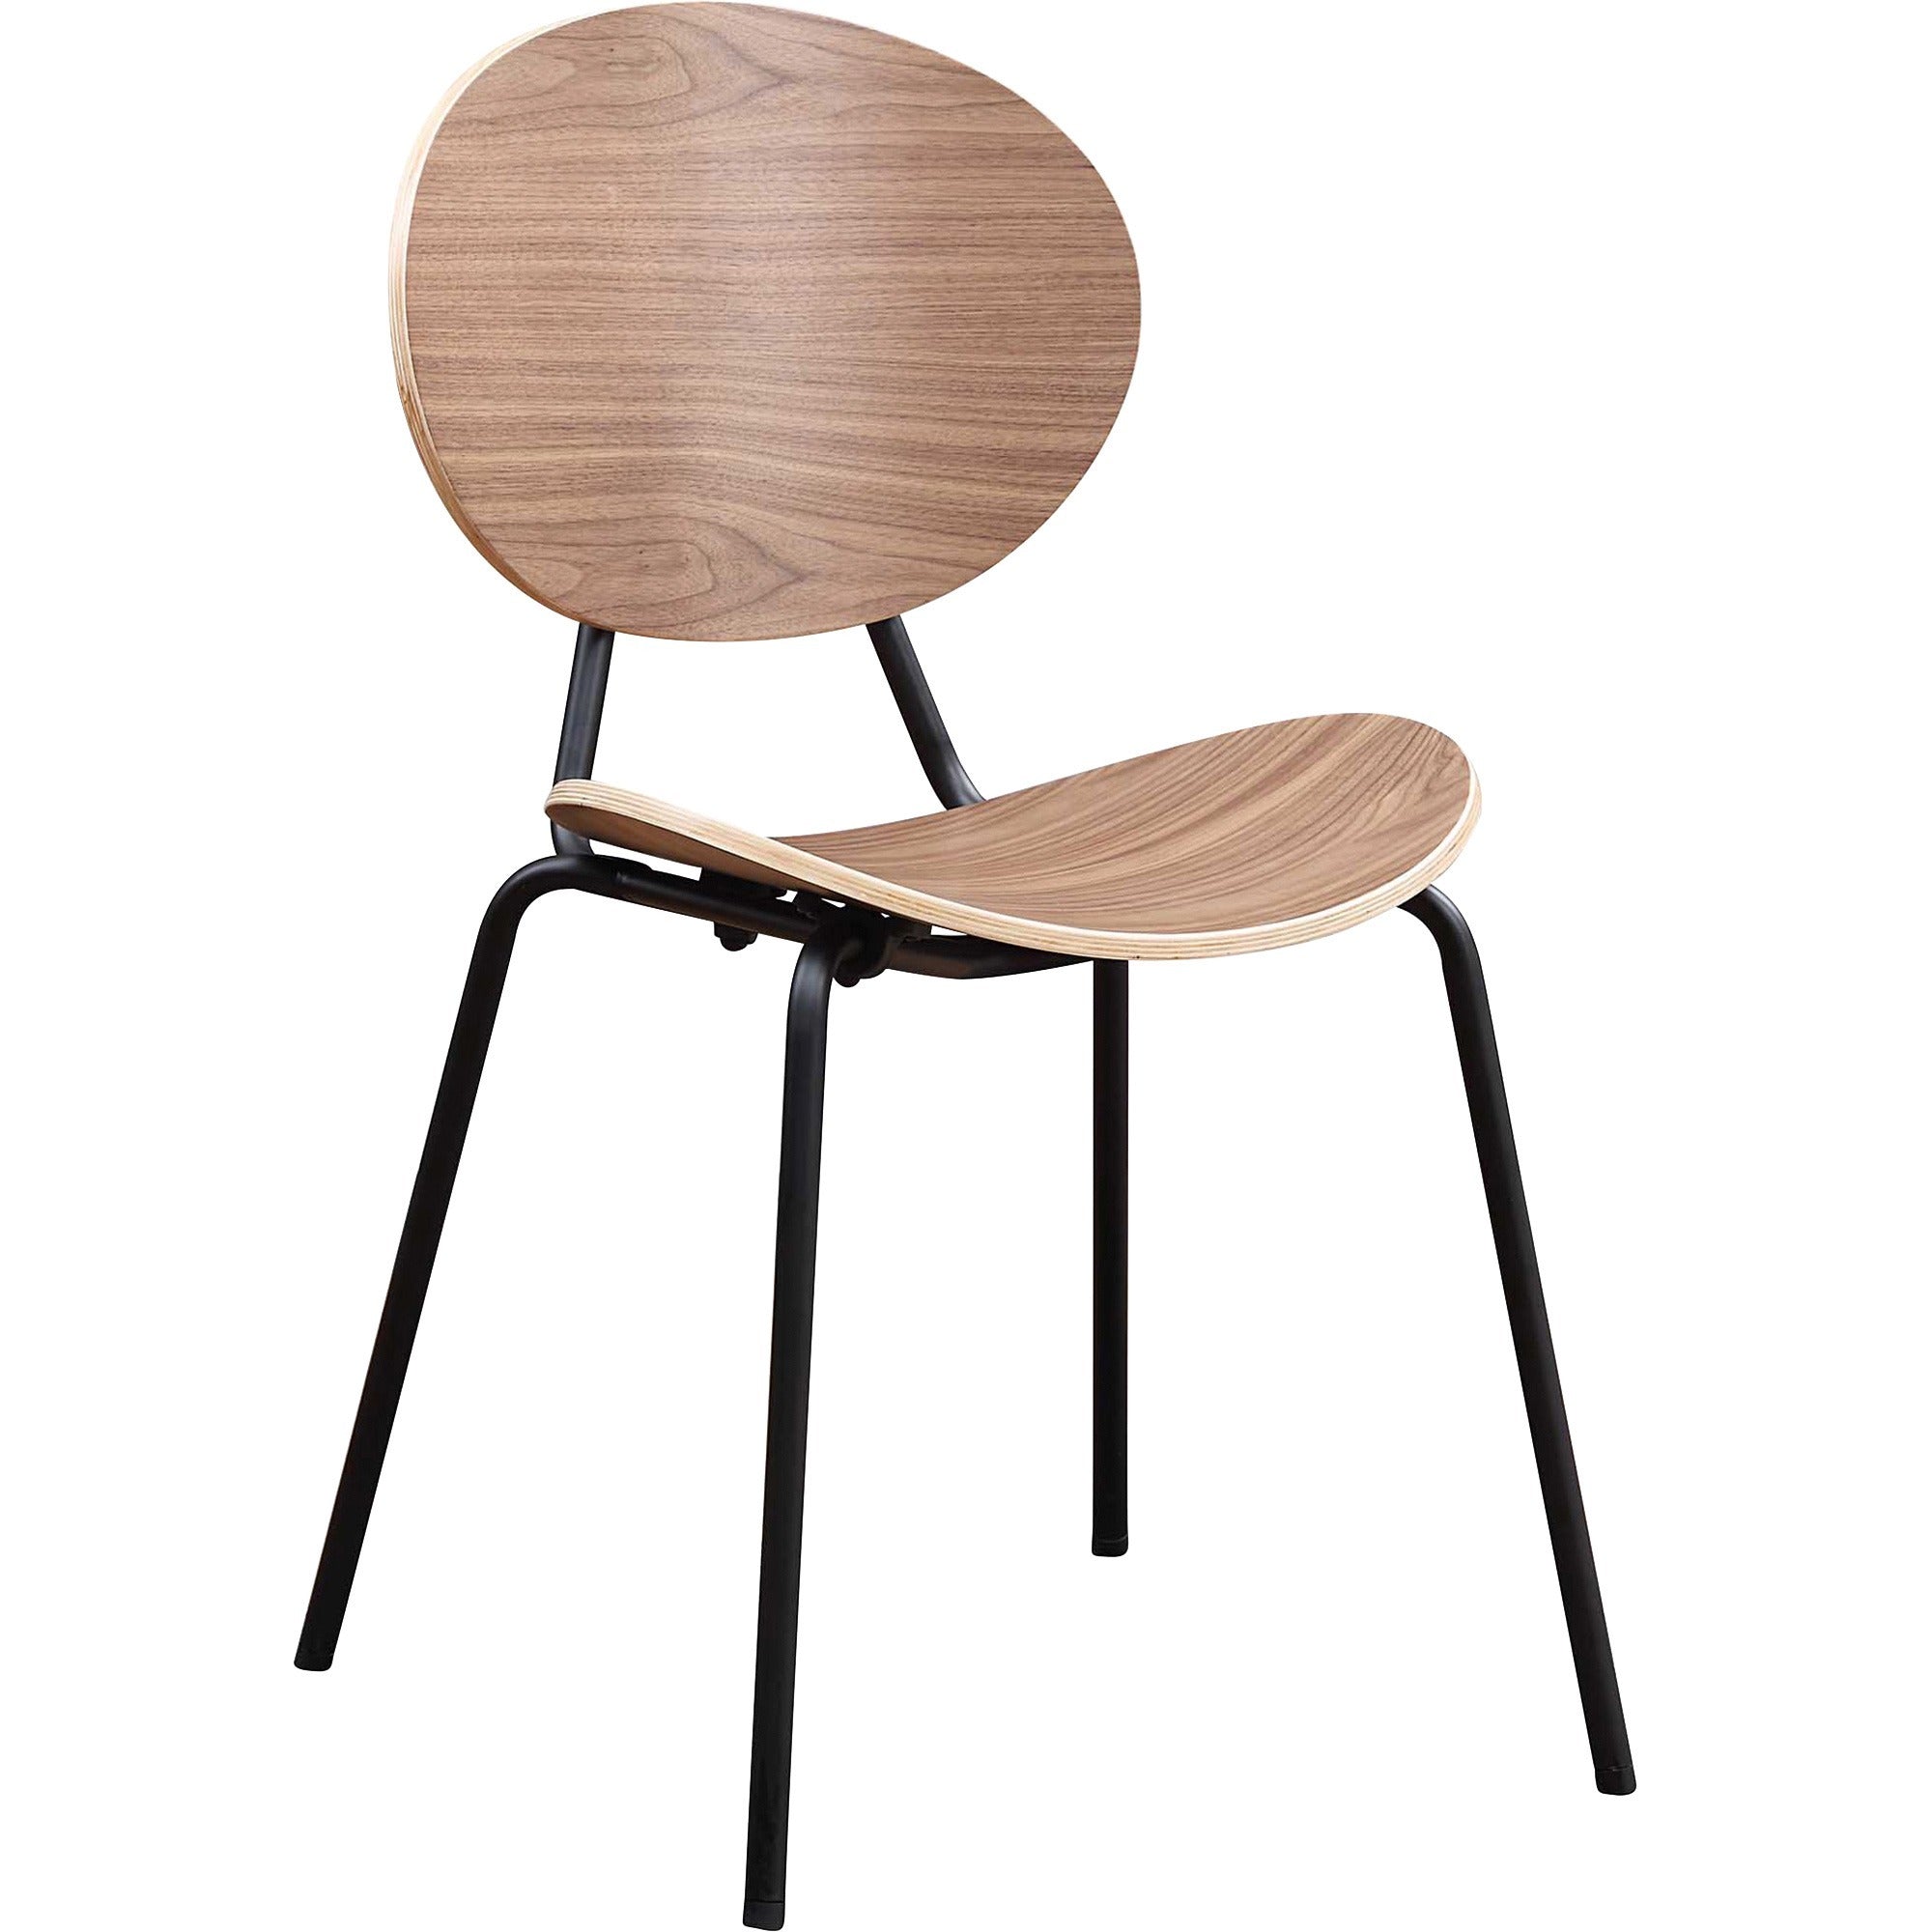 lorell-bentwood-cafe-chairs-plywood-seat-plywood-back-metal-powder-coated-steel-frame-walnut-2-carton_llr42962 - 1